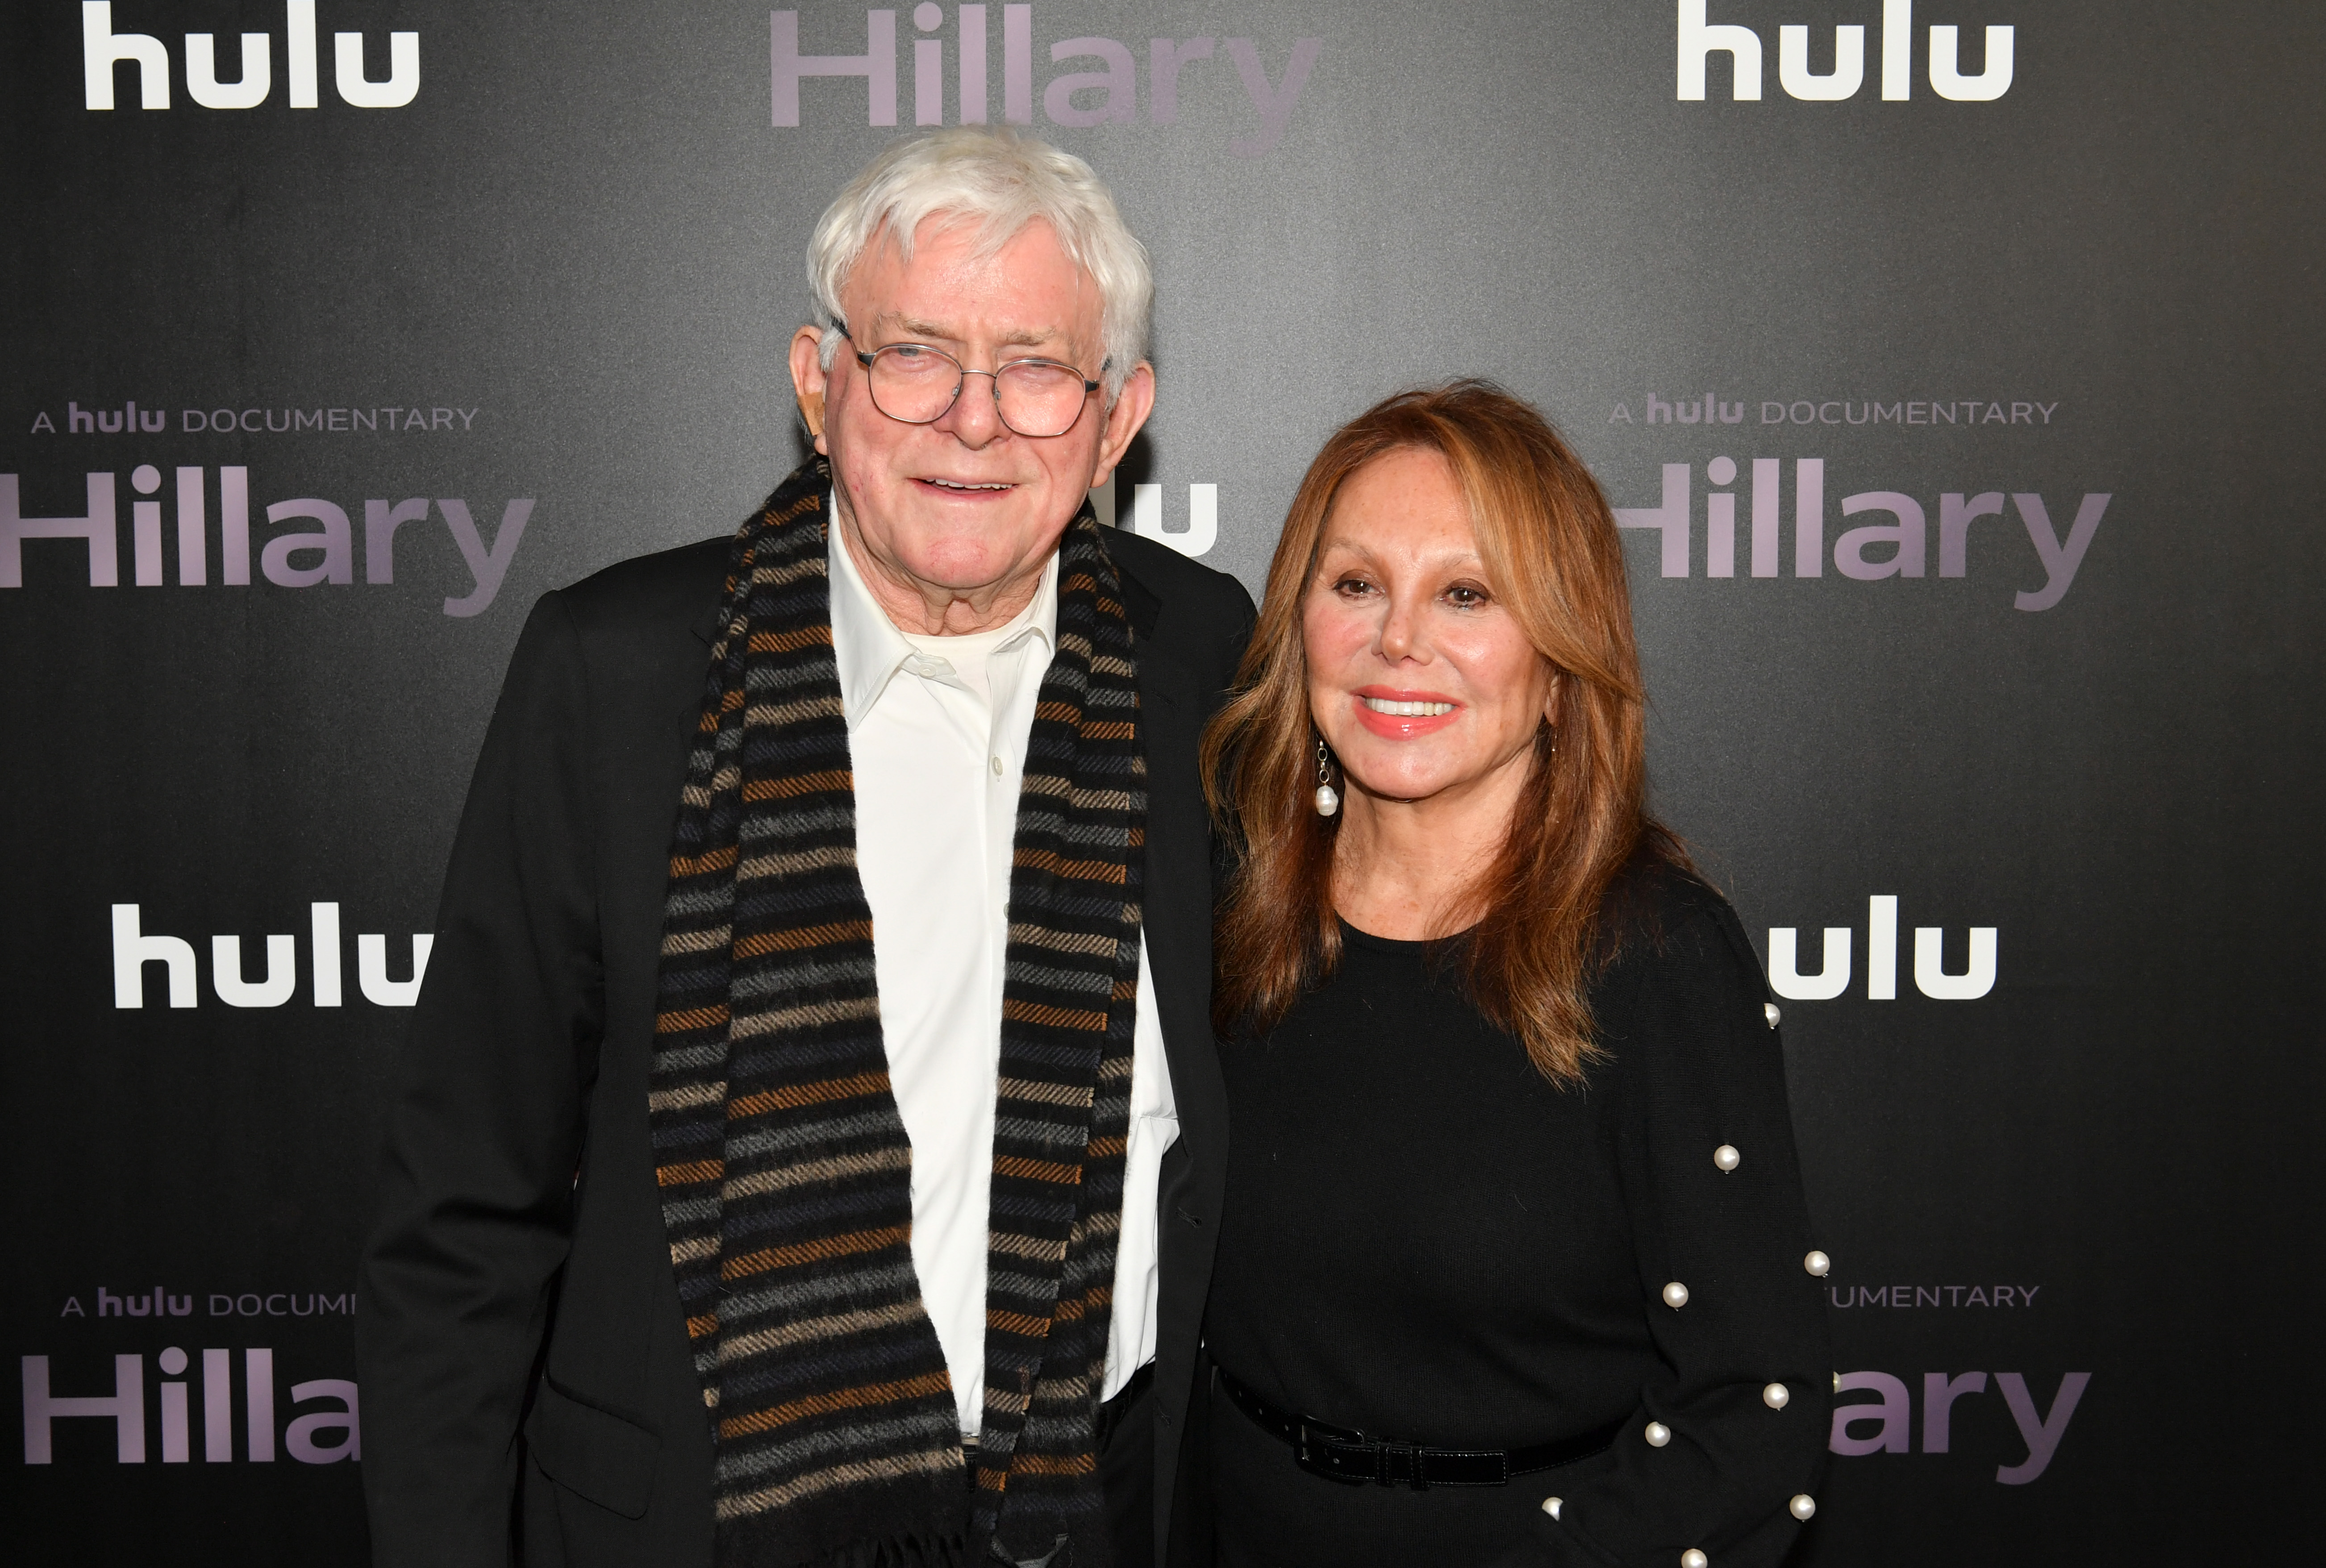 Phil Donahue and Marlo Thomas at the 'Hillary' film premiere in New York City, on March 4, 2020. | Source: Getty Images